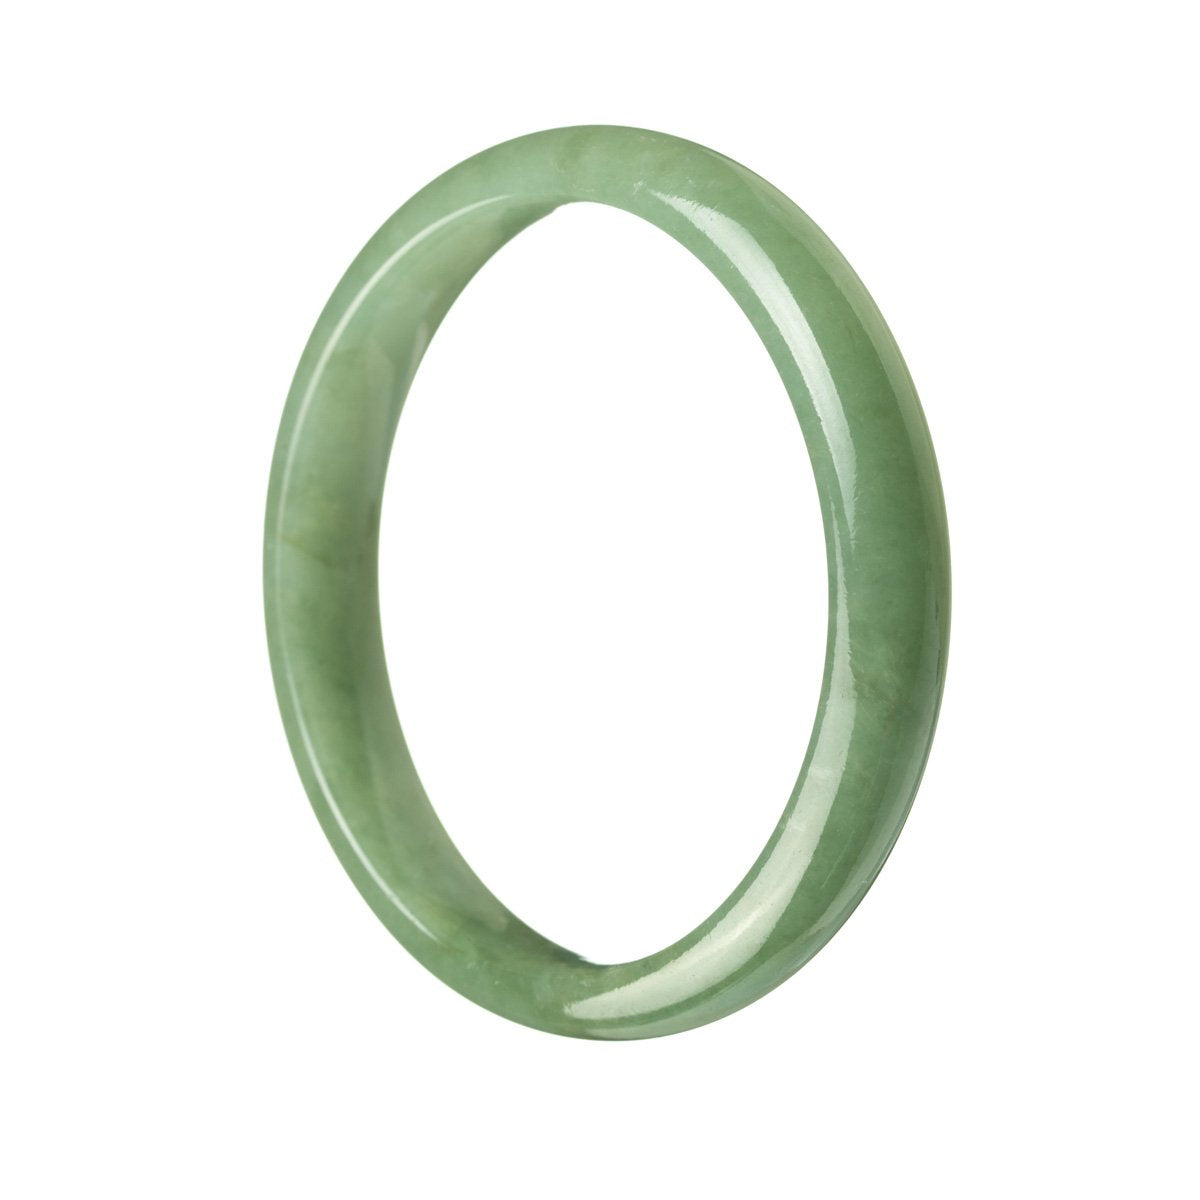 A beautiful, genuine jade bangle in a vibrant shade of green, with a semi-round shape and a diameter of 59mm. Perfect for adding a touch of elegance and sophistication to any outfit.